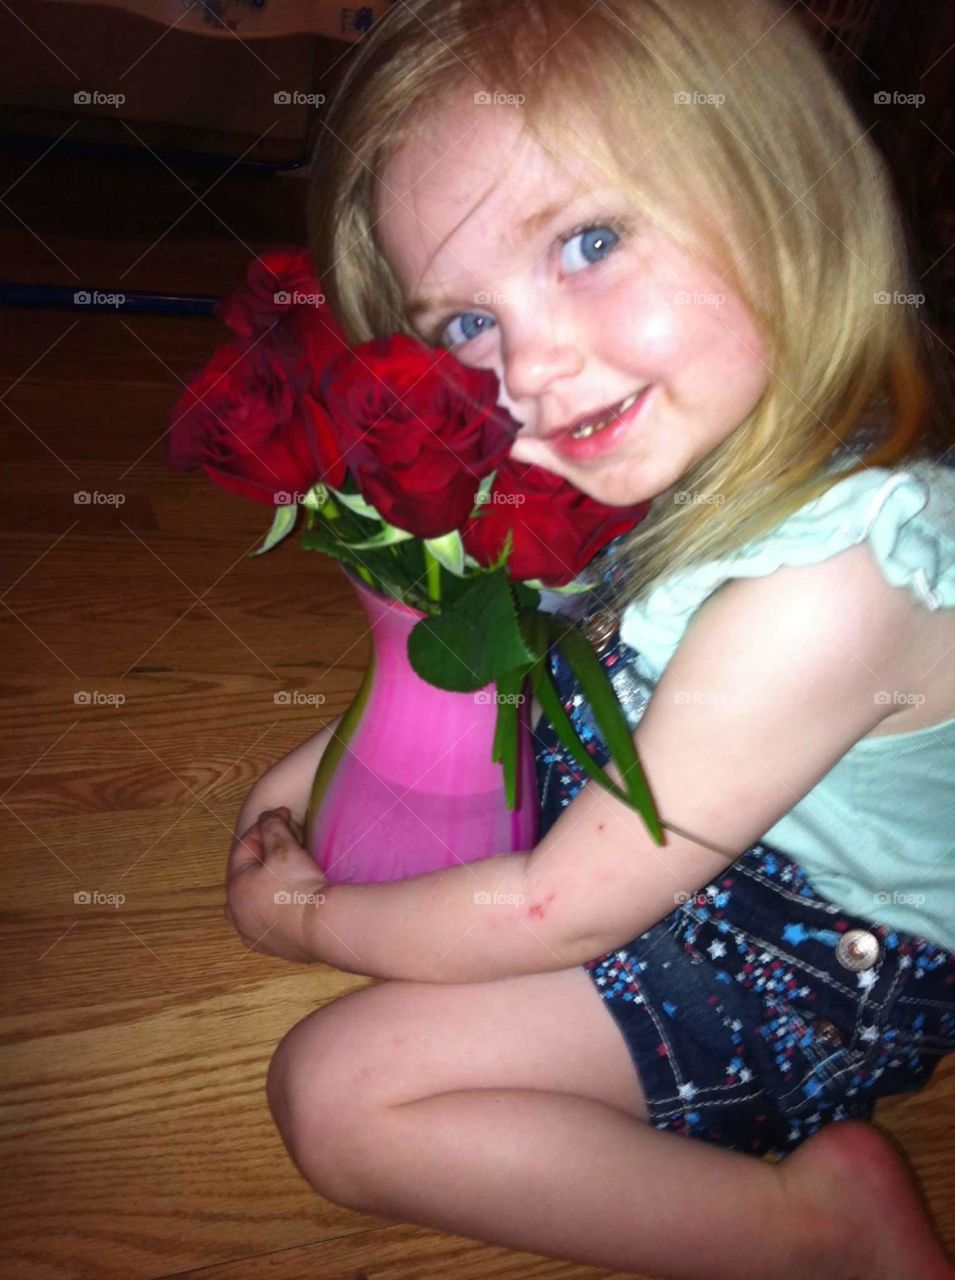 Little Girl with Roses